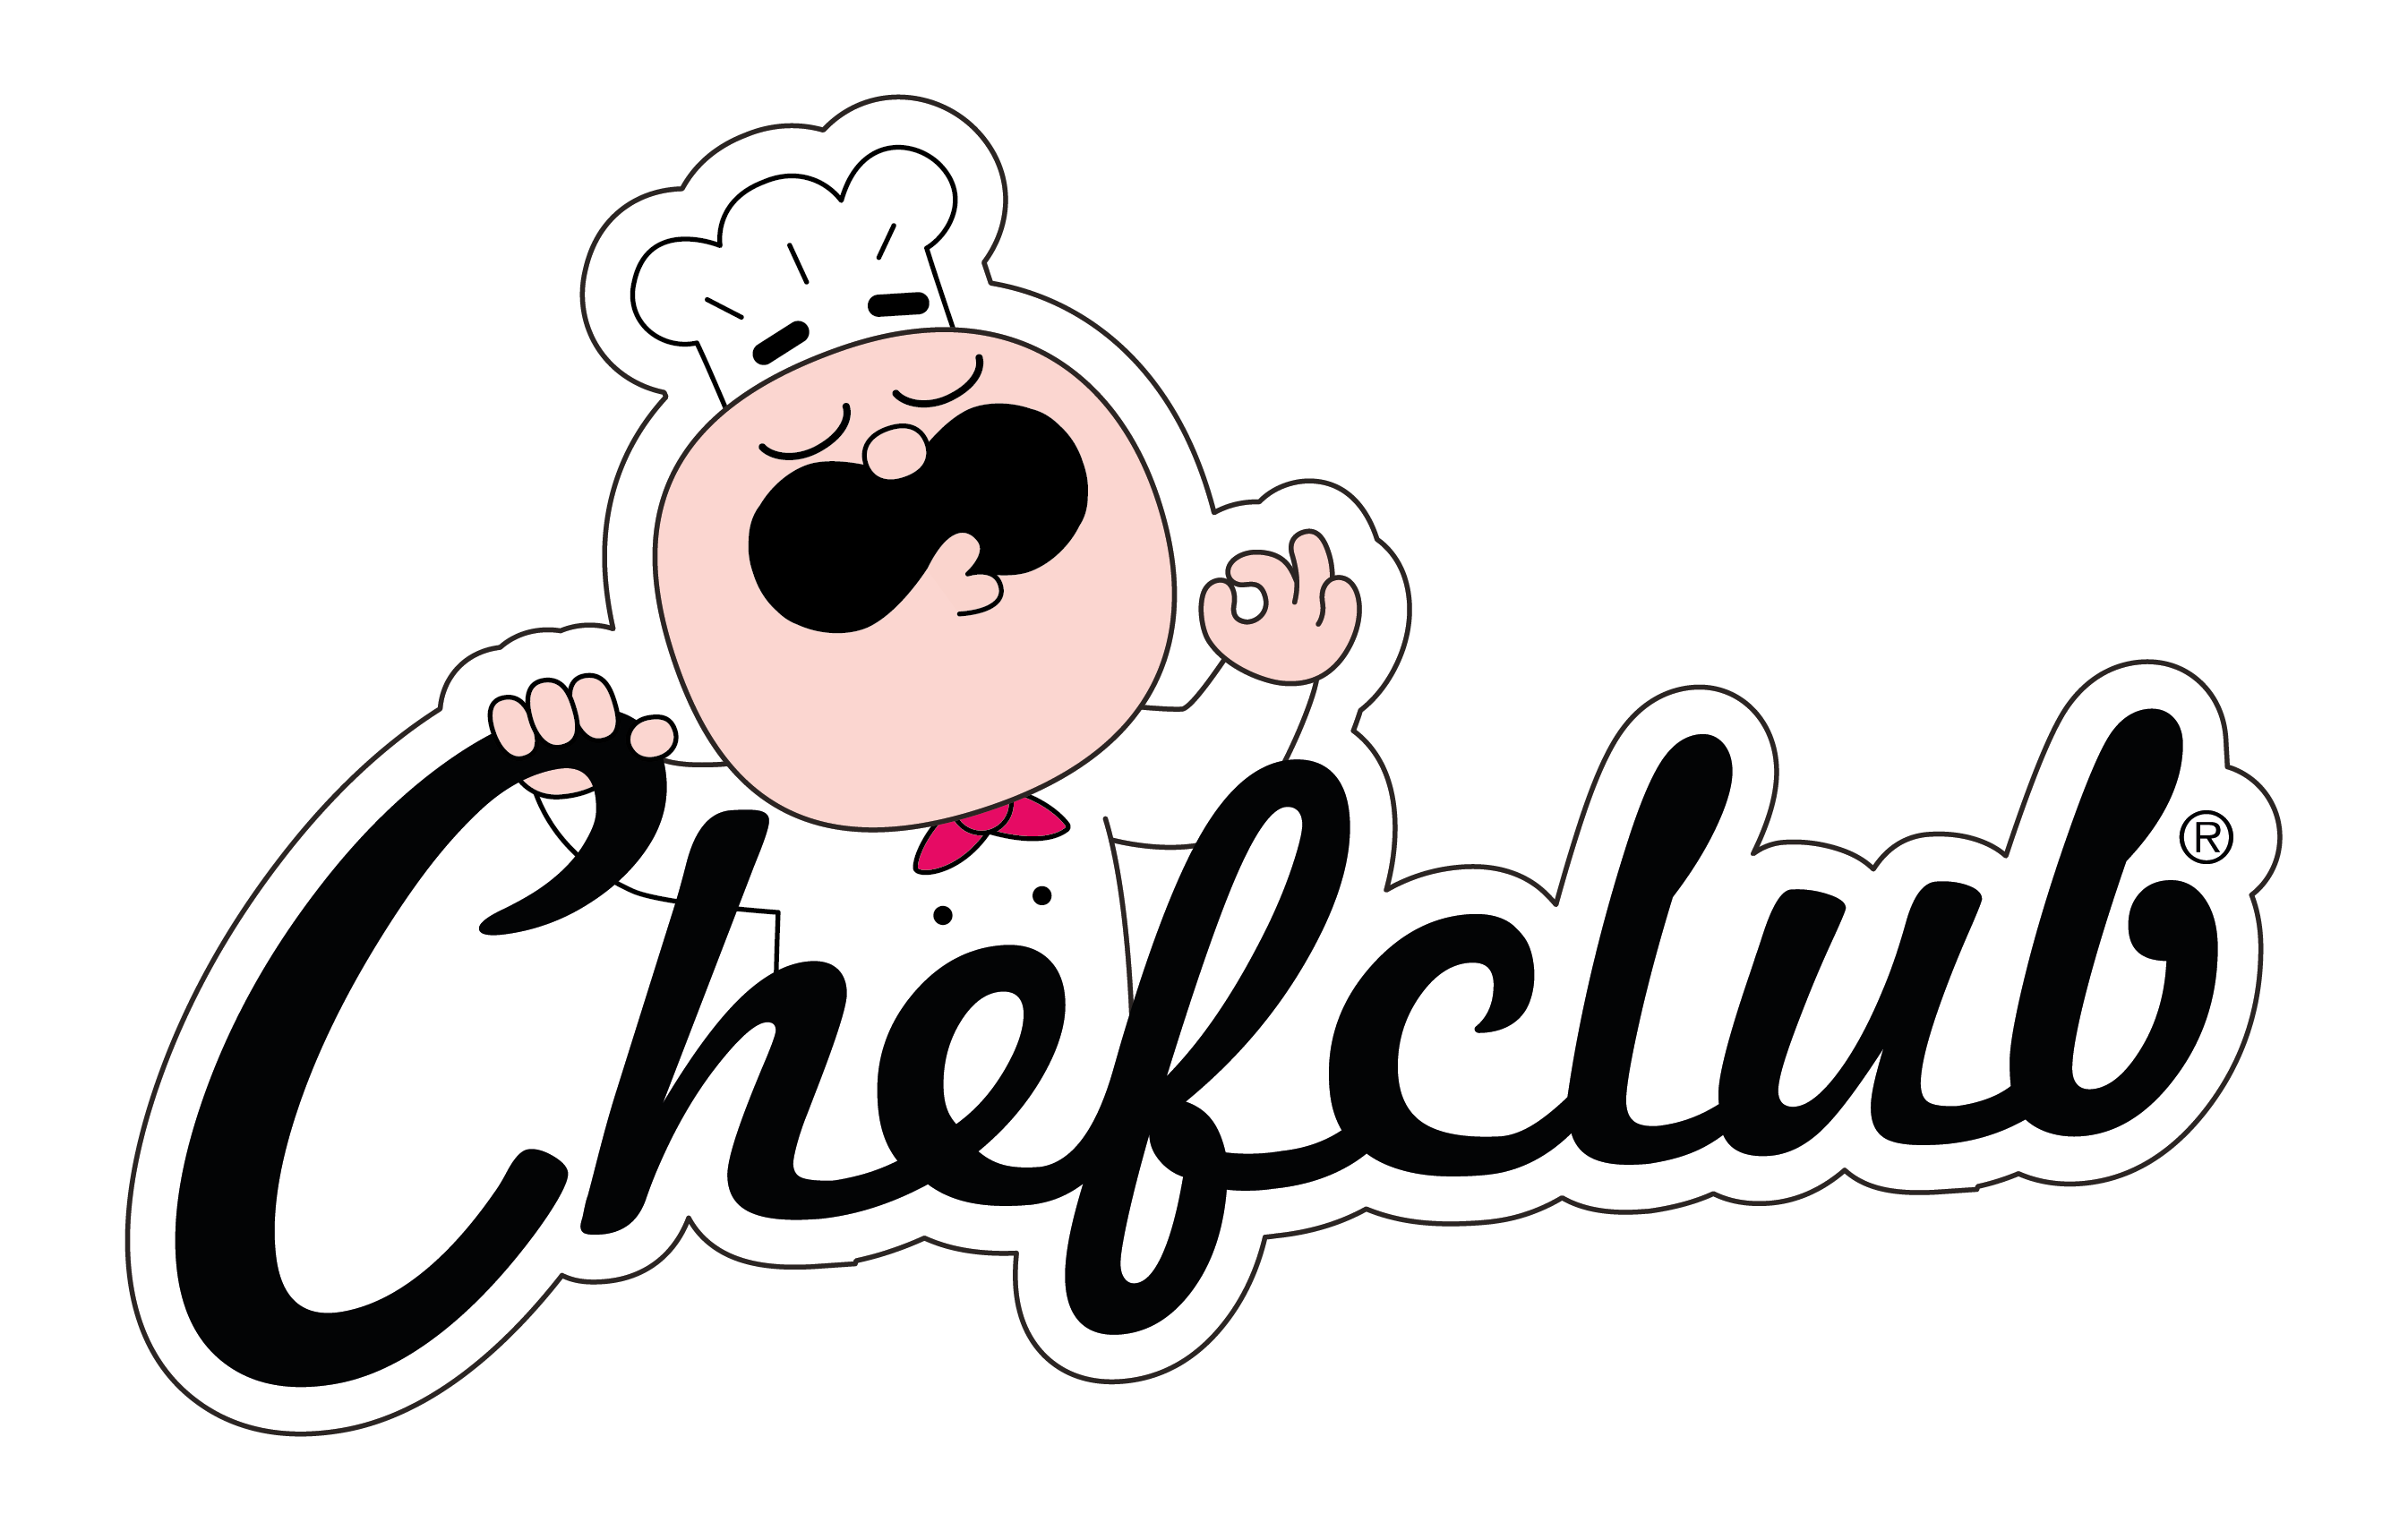 Chefclub - Chefclub updated their cover photo.